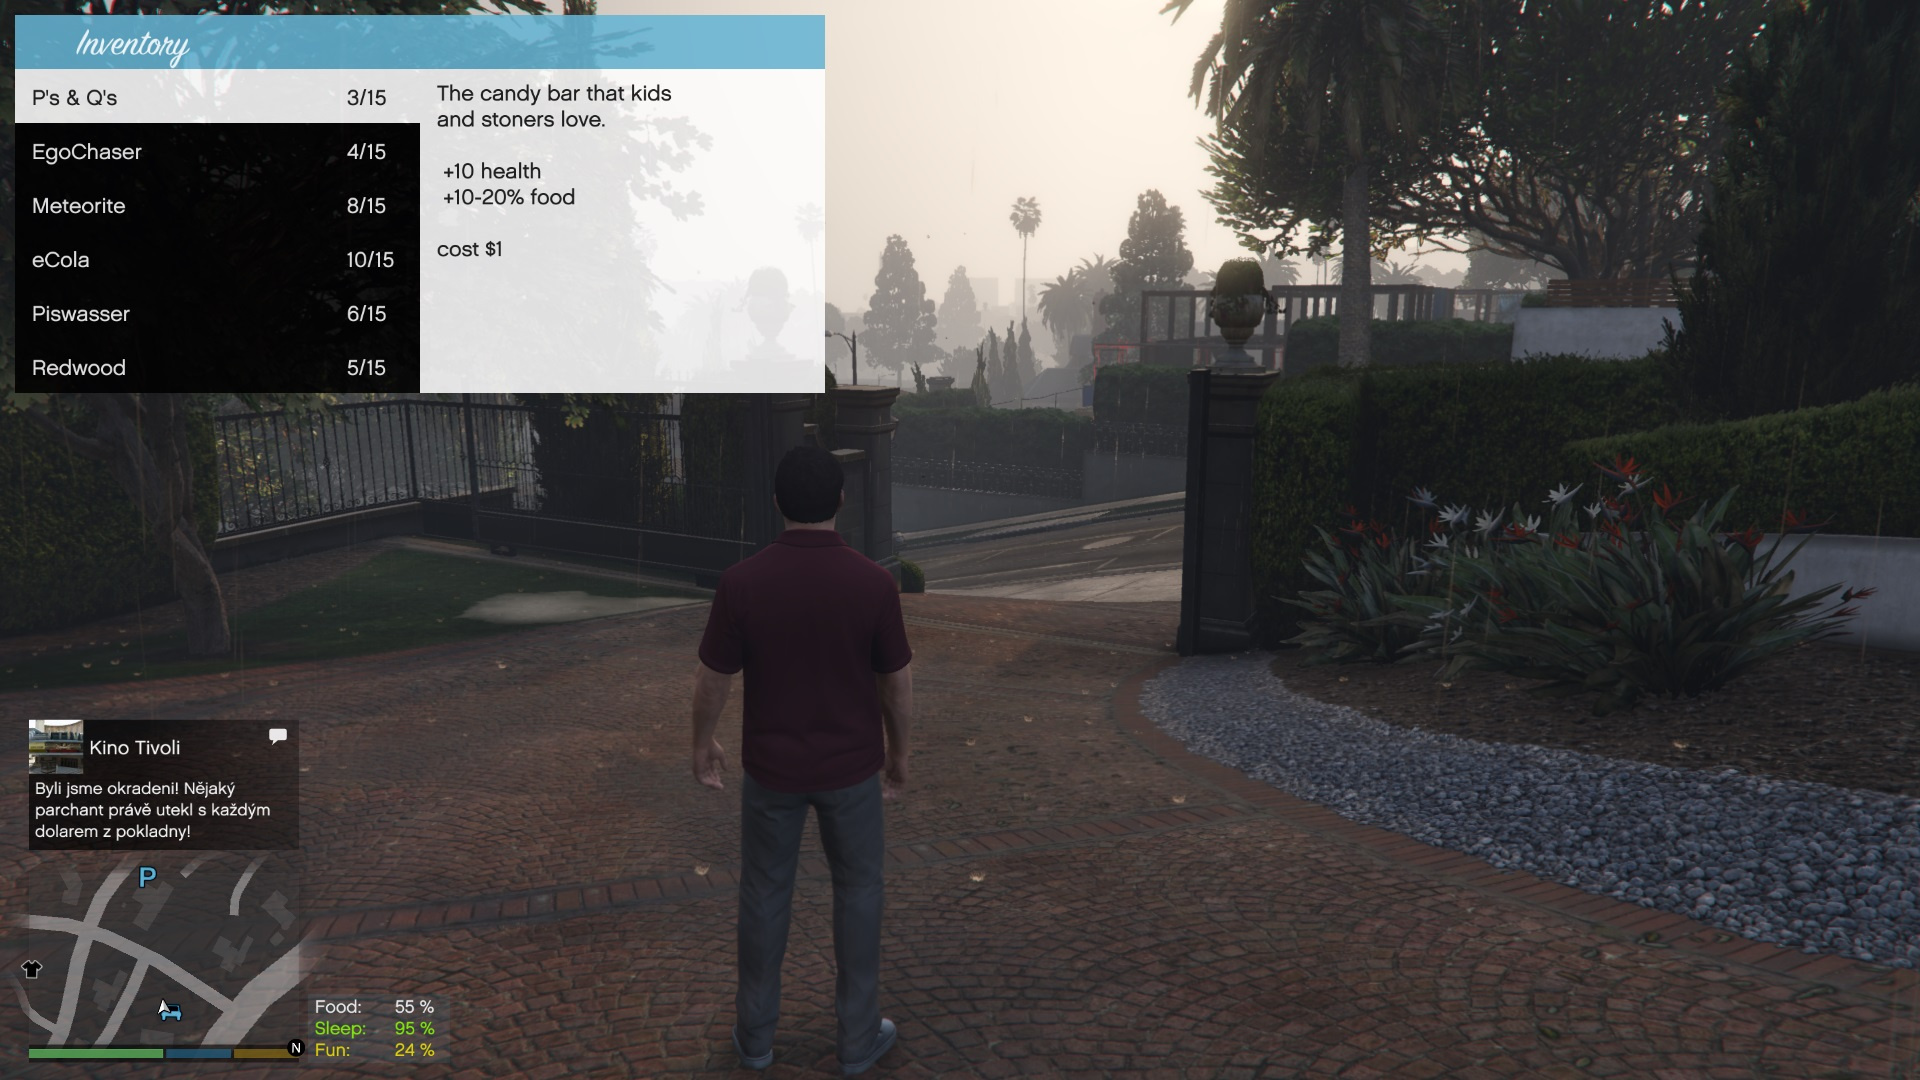 GTA5 mod help I can't use mod in gta5 game. I have downloaded all